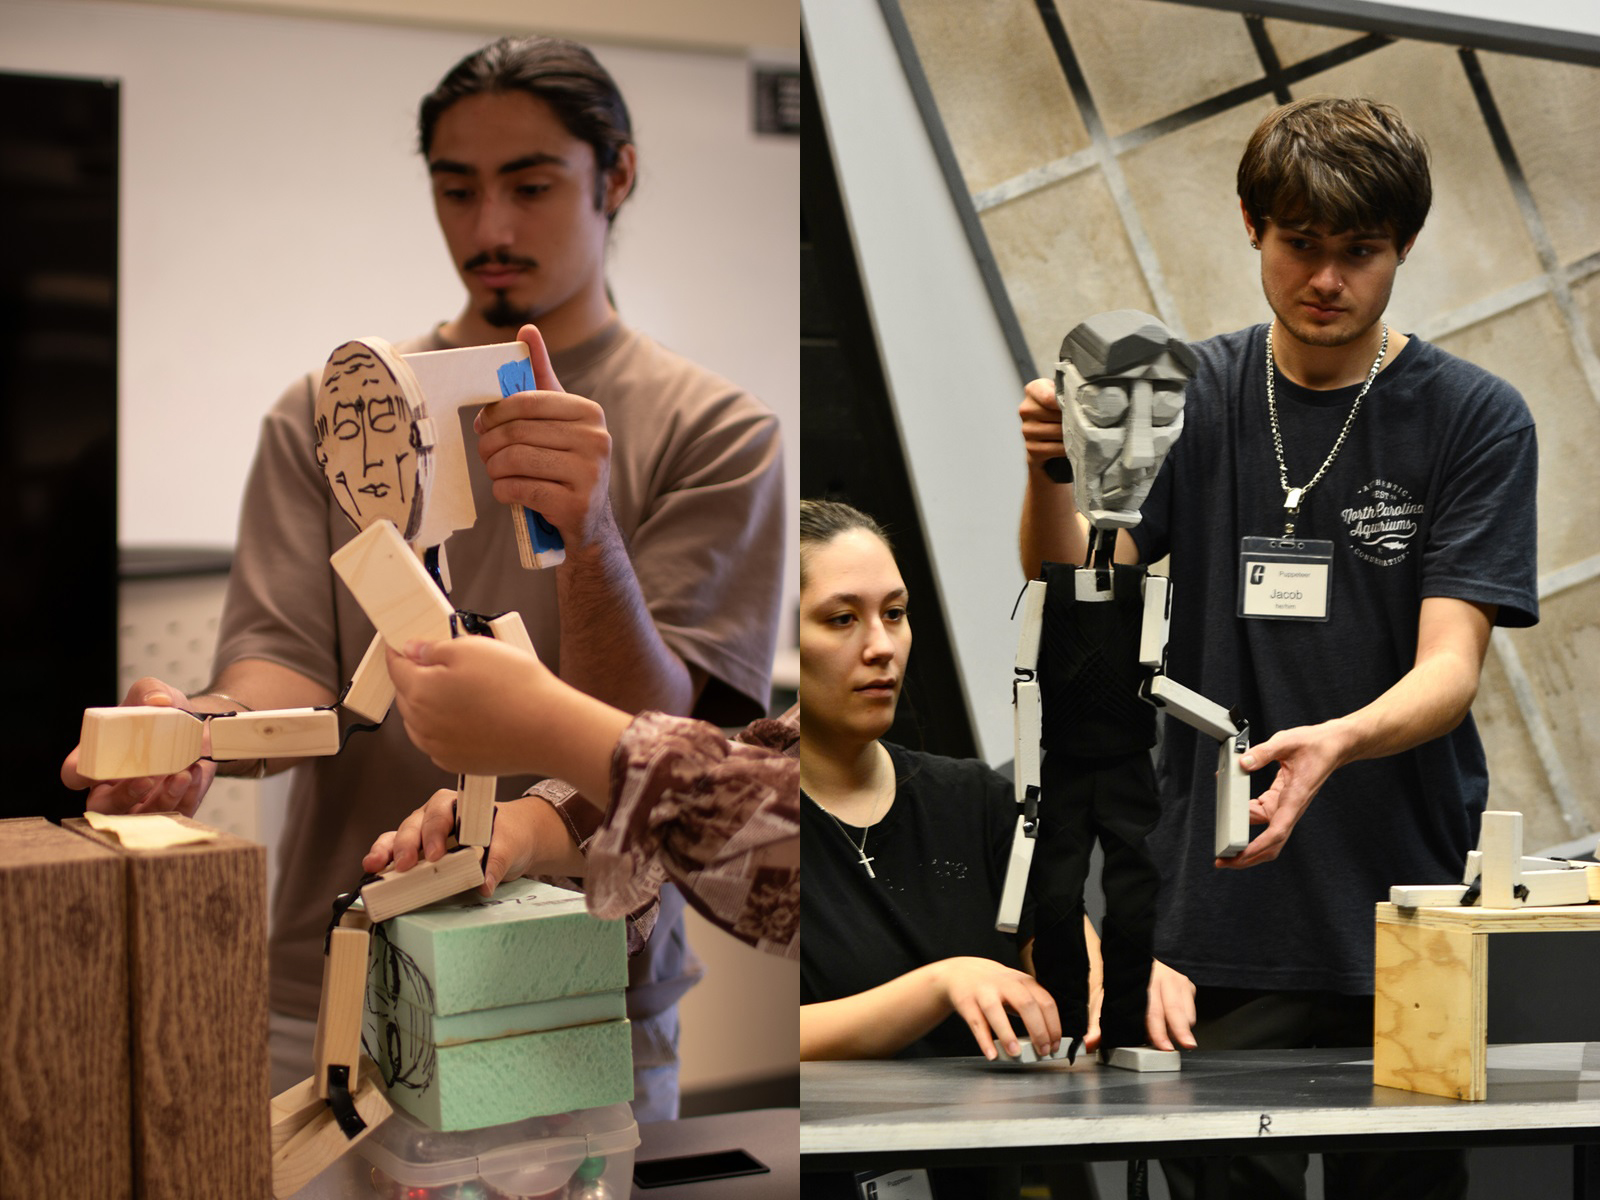 composite image of students Diego Milner and Jacob Scannell operating puppets